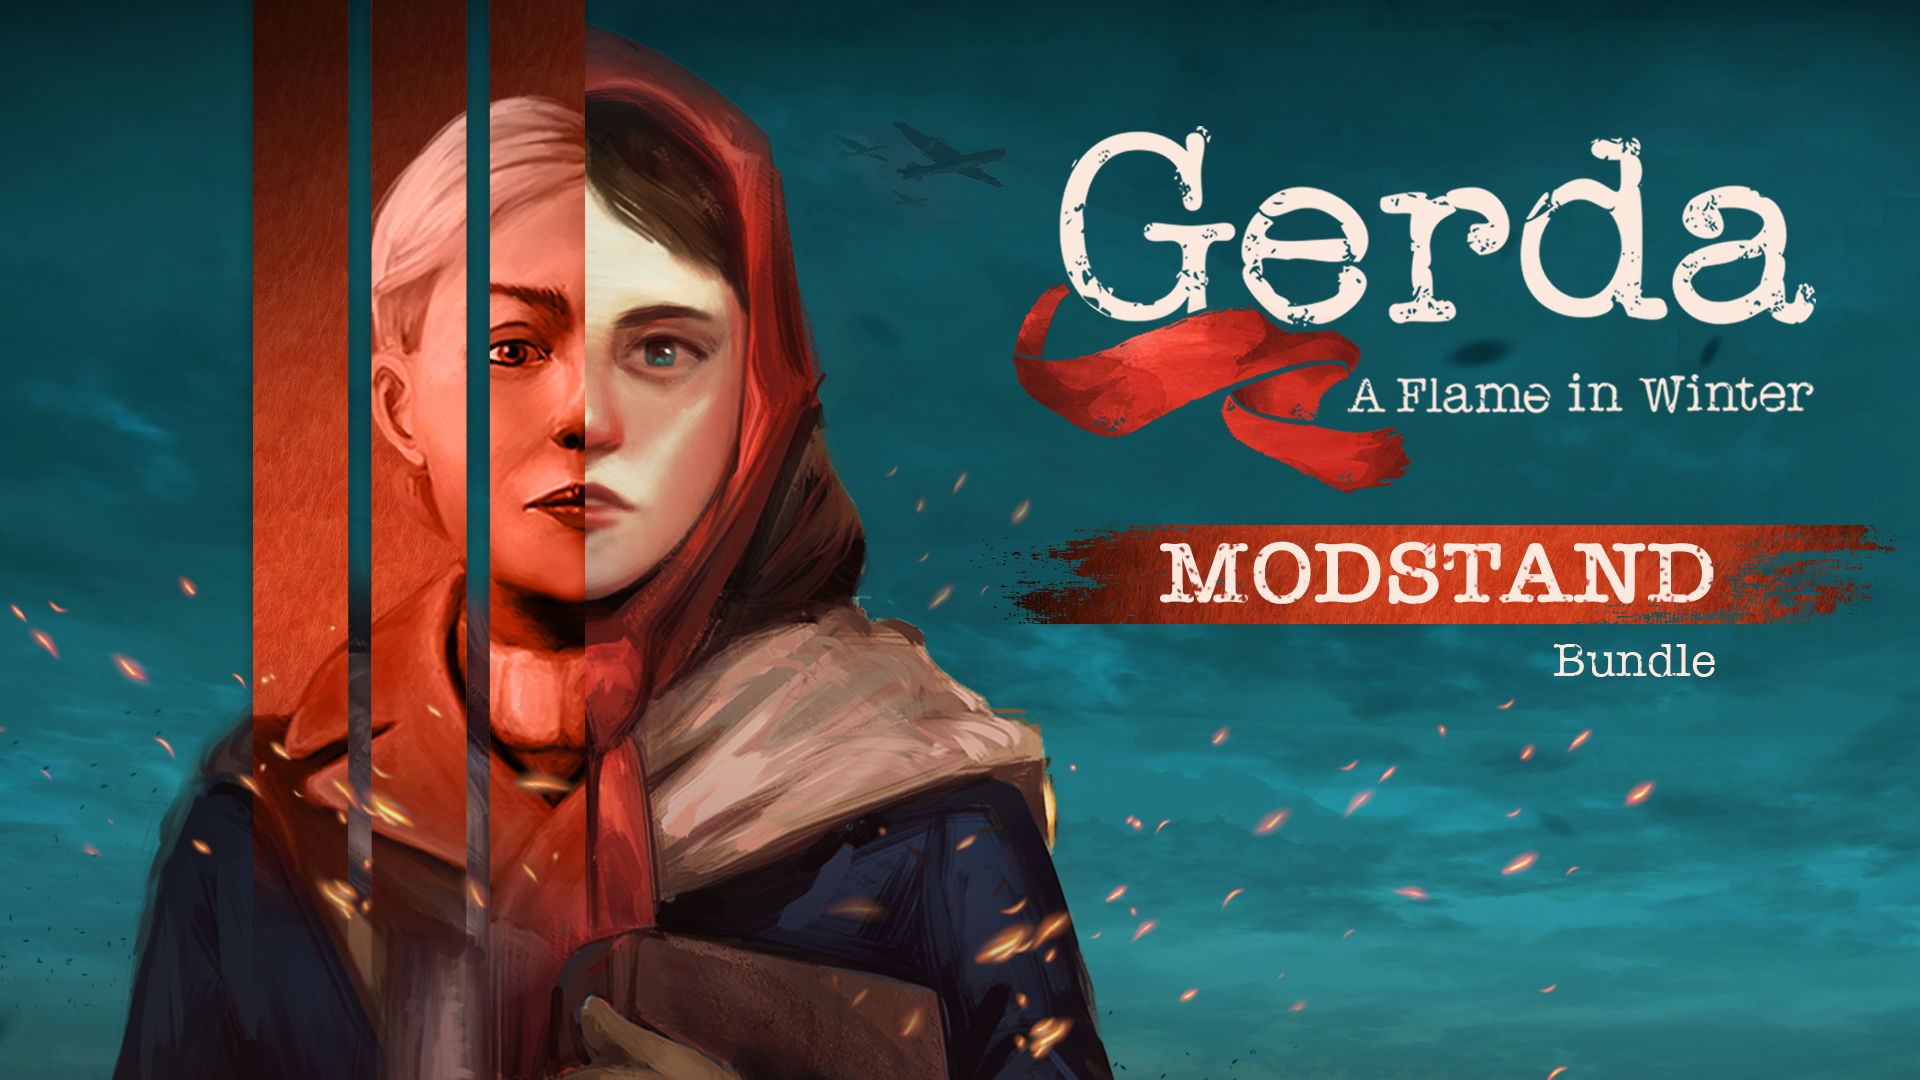 Liva’s Story, a Gerda: A Flame in Winter DLC, is out now!